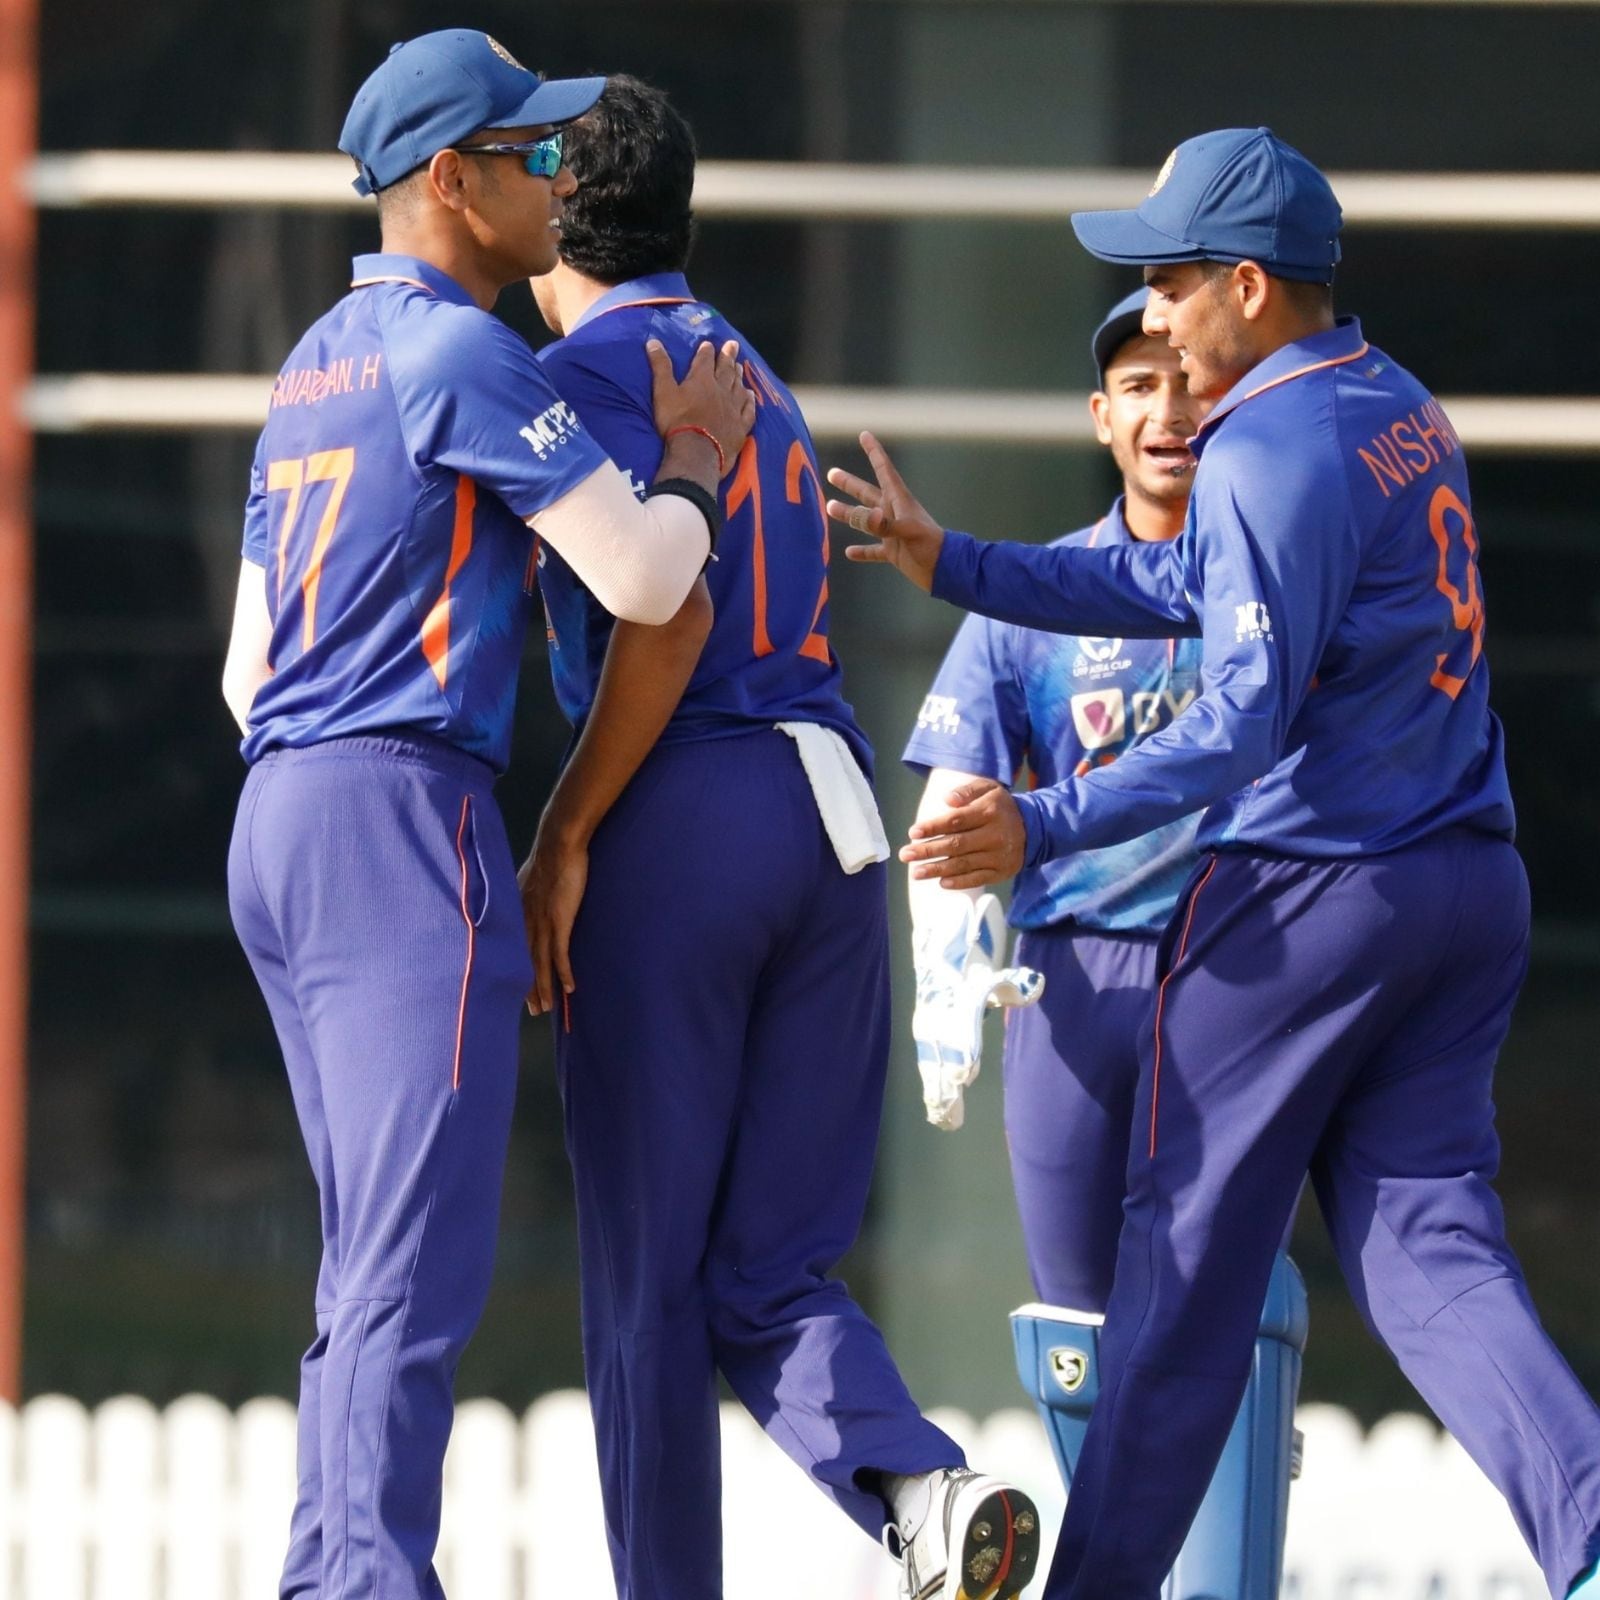 India U19 vs Afghanistan U19 Live Streaming When and Where to Watch Asia Cup 2021/22 Live Coverage on Live TV Online